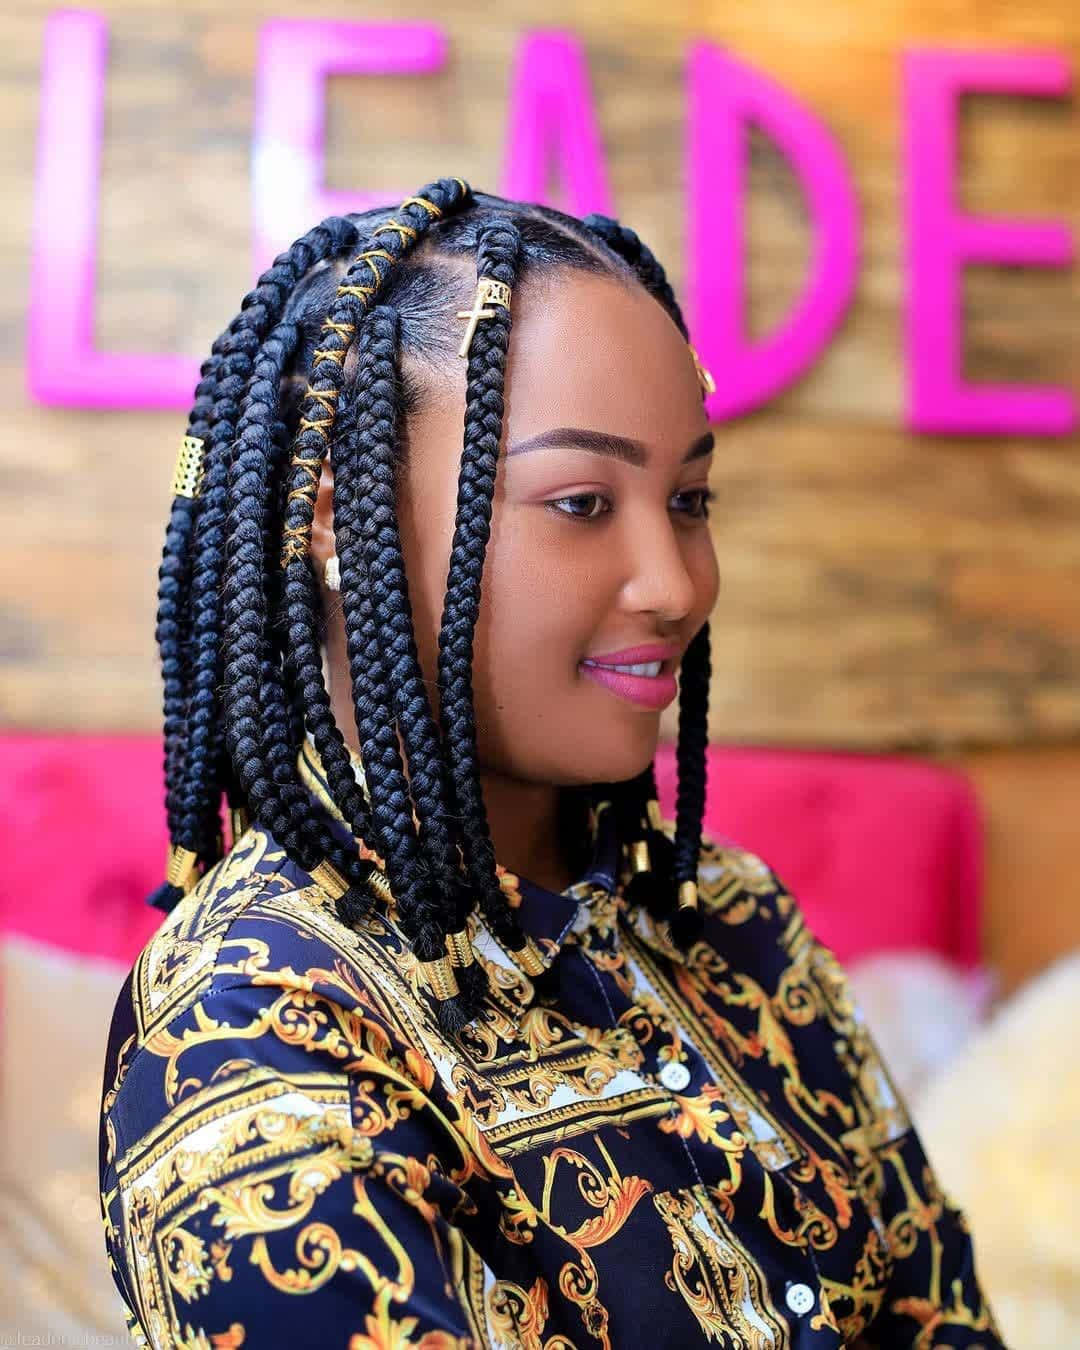 A Woman With Braids Sitting On A Couch